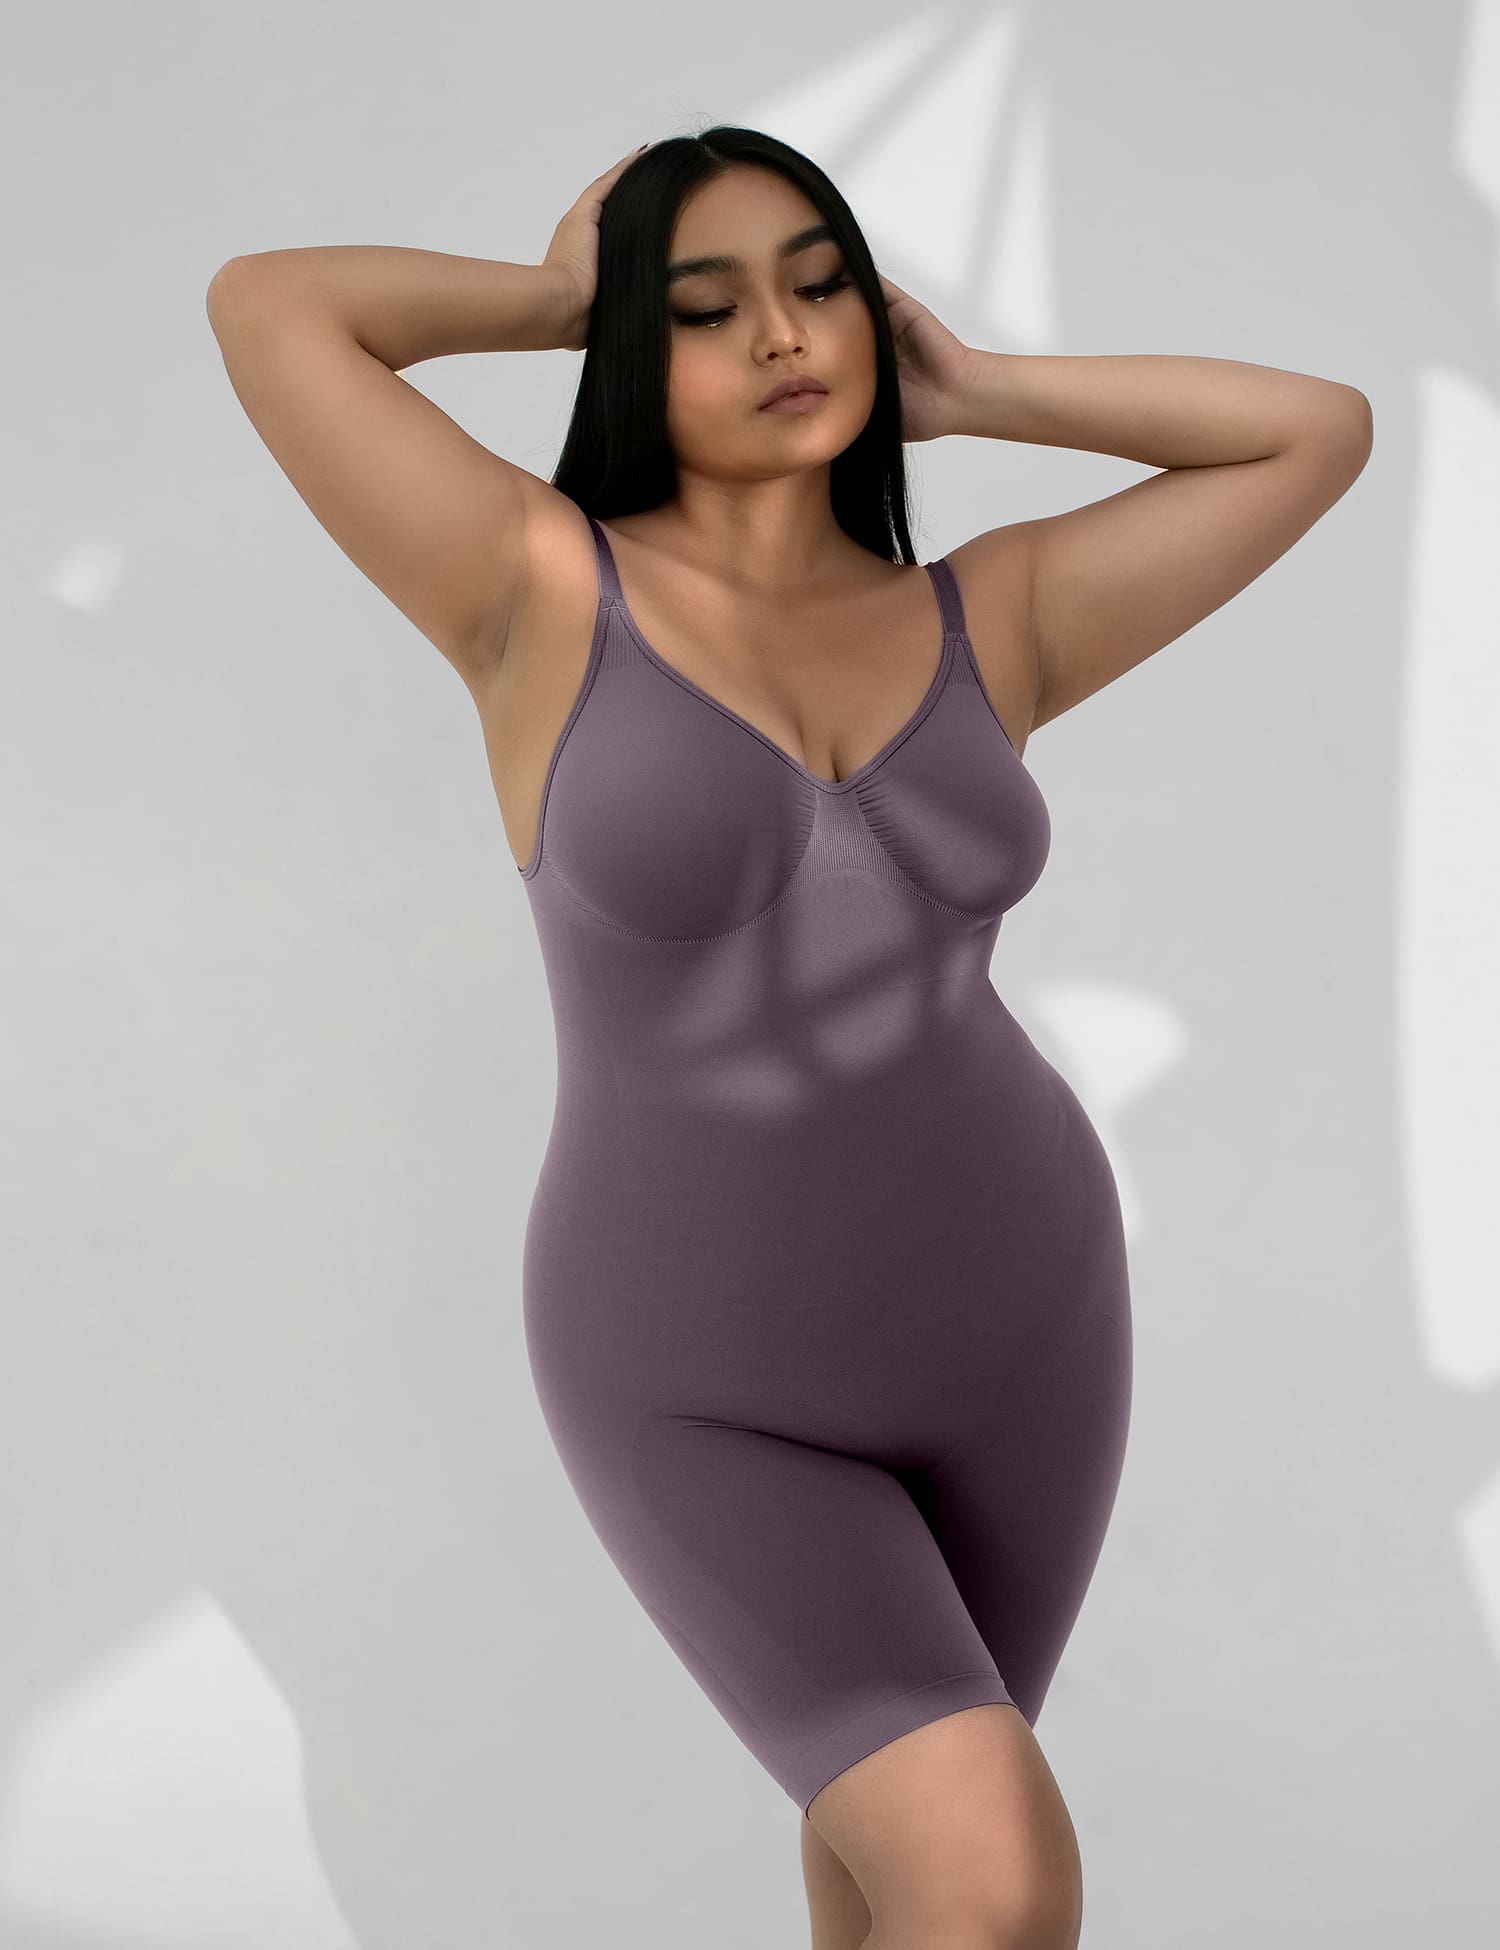 PUMIEY just came out with an hourglass shapewear collection 🙌🏻 This